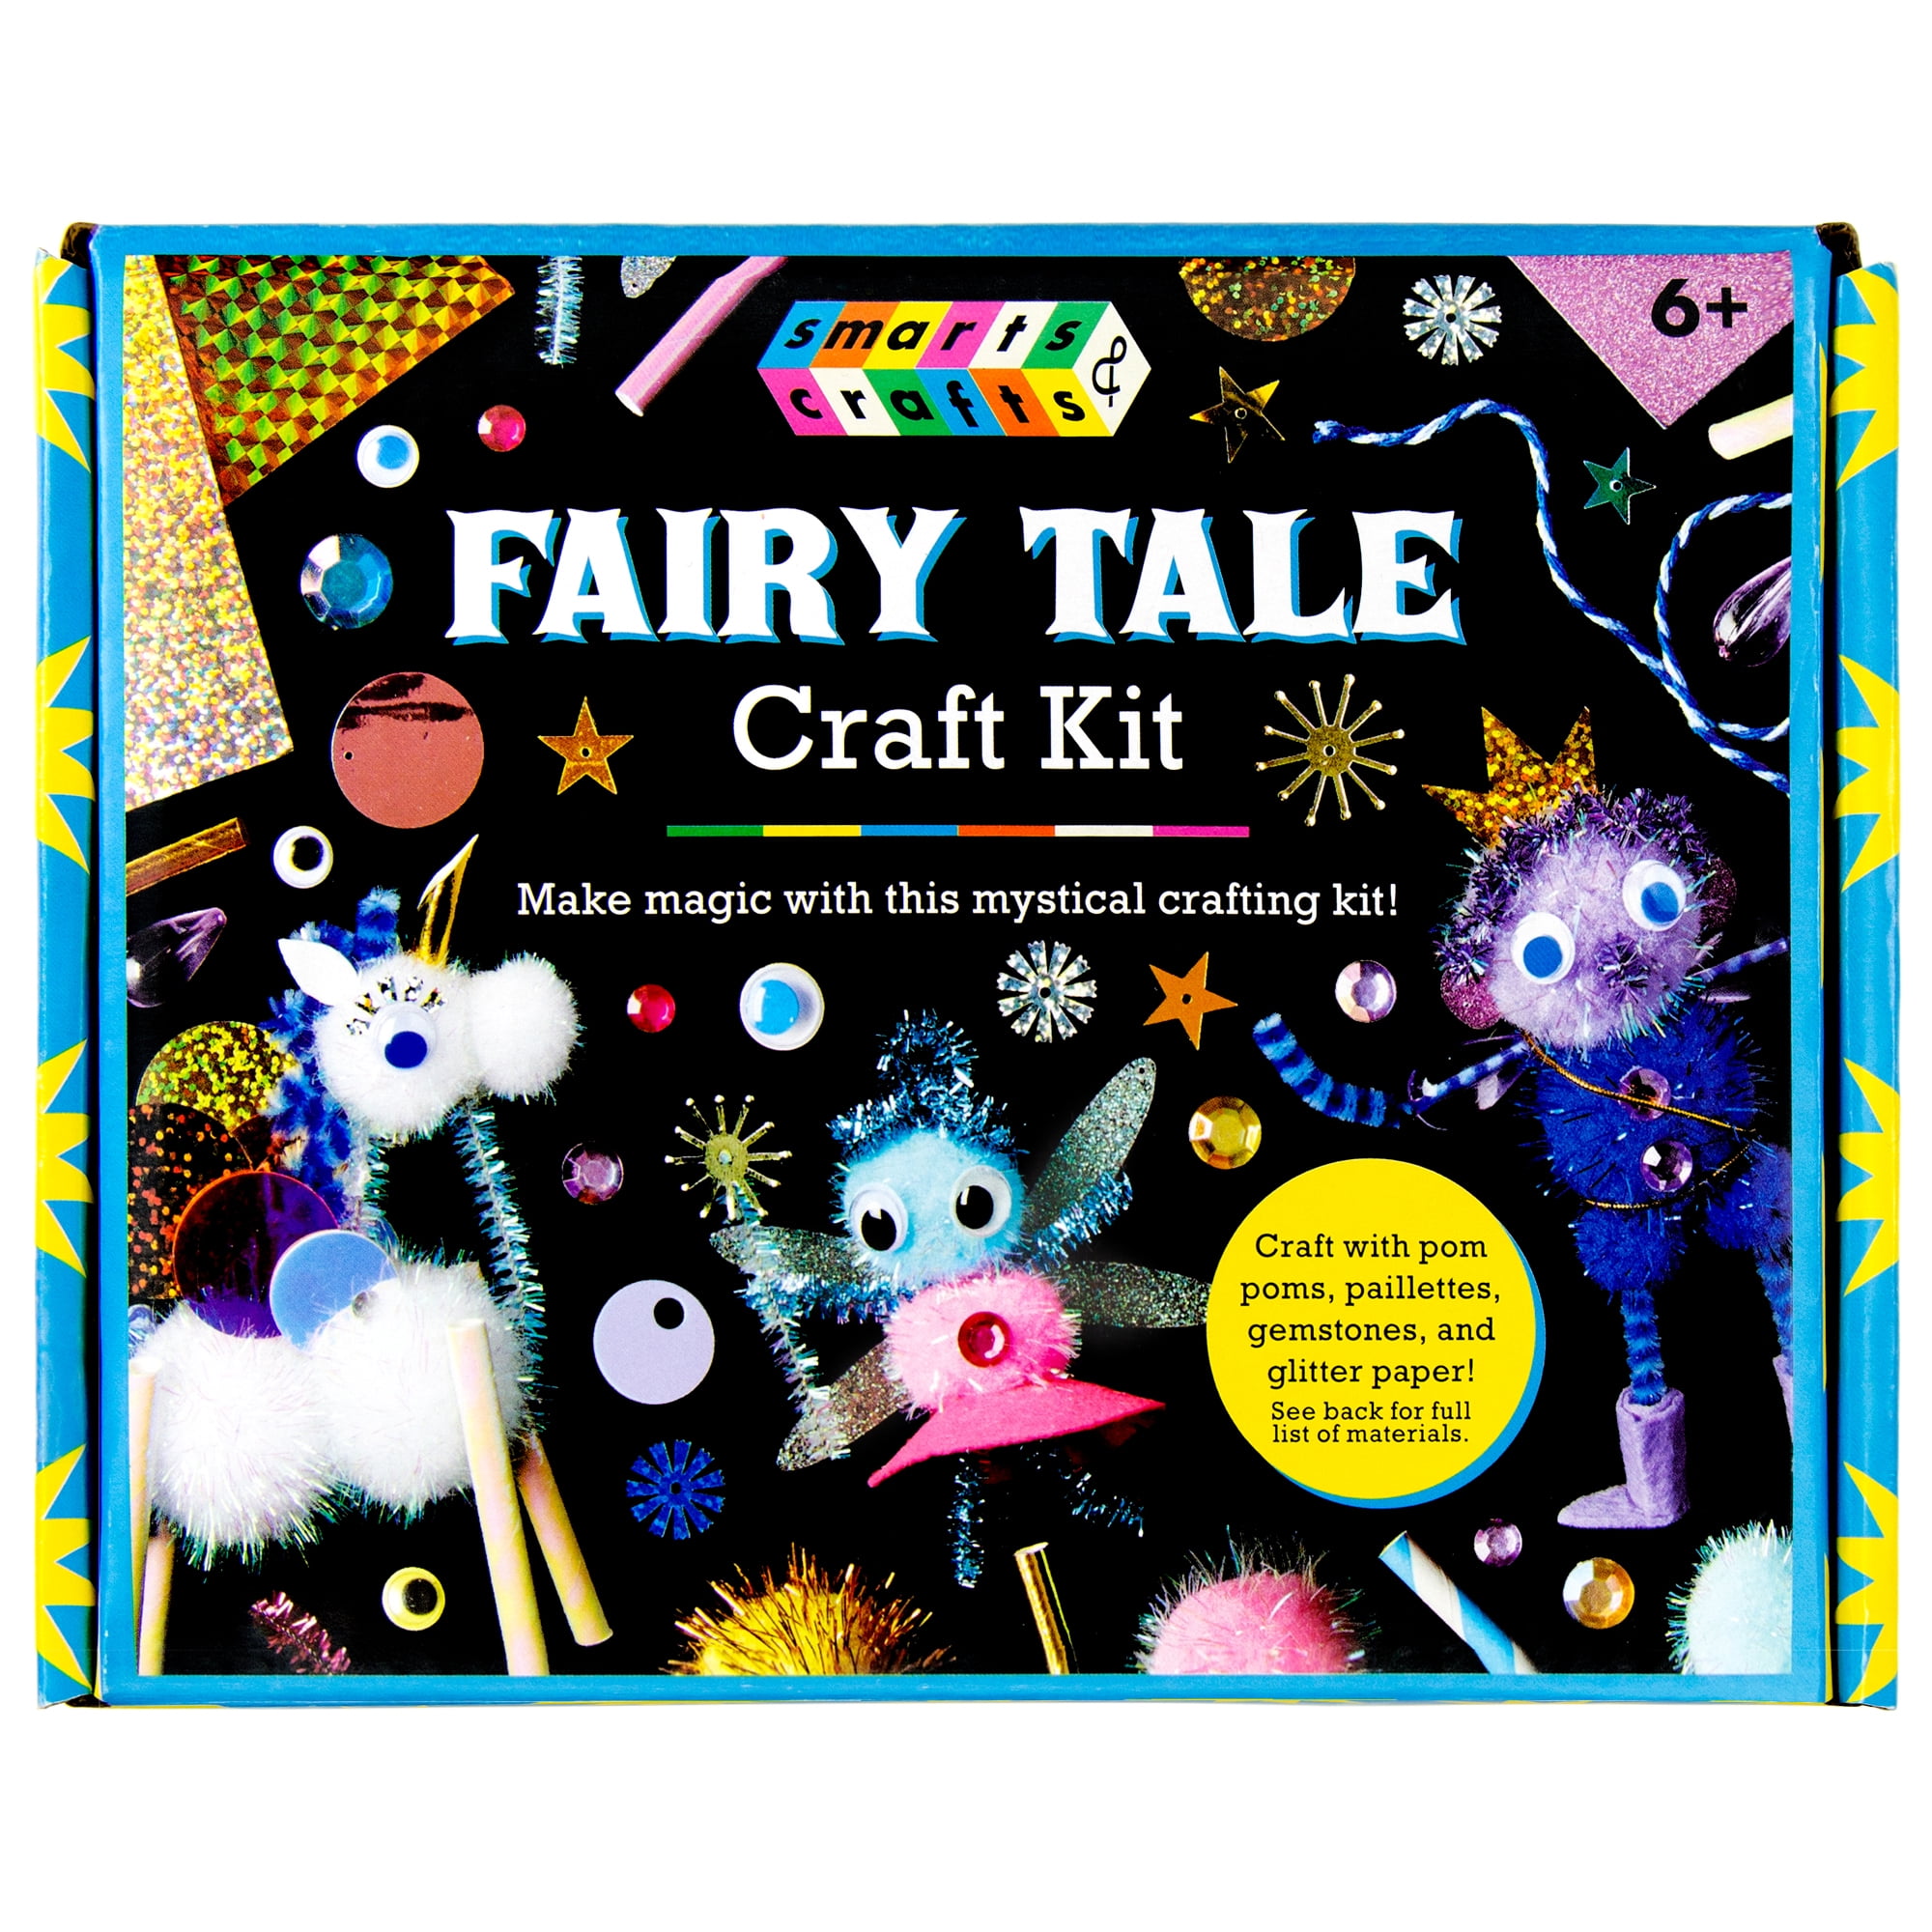 Dan&Darci' 'Arts and Crafts Vault - 1000+ Piece Craft Kit Library in A Box for Kids Ages 4 5 6 7 8 9 10 11 & 12 Year Old Girls & Boys - Crafting